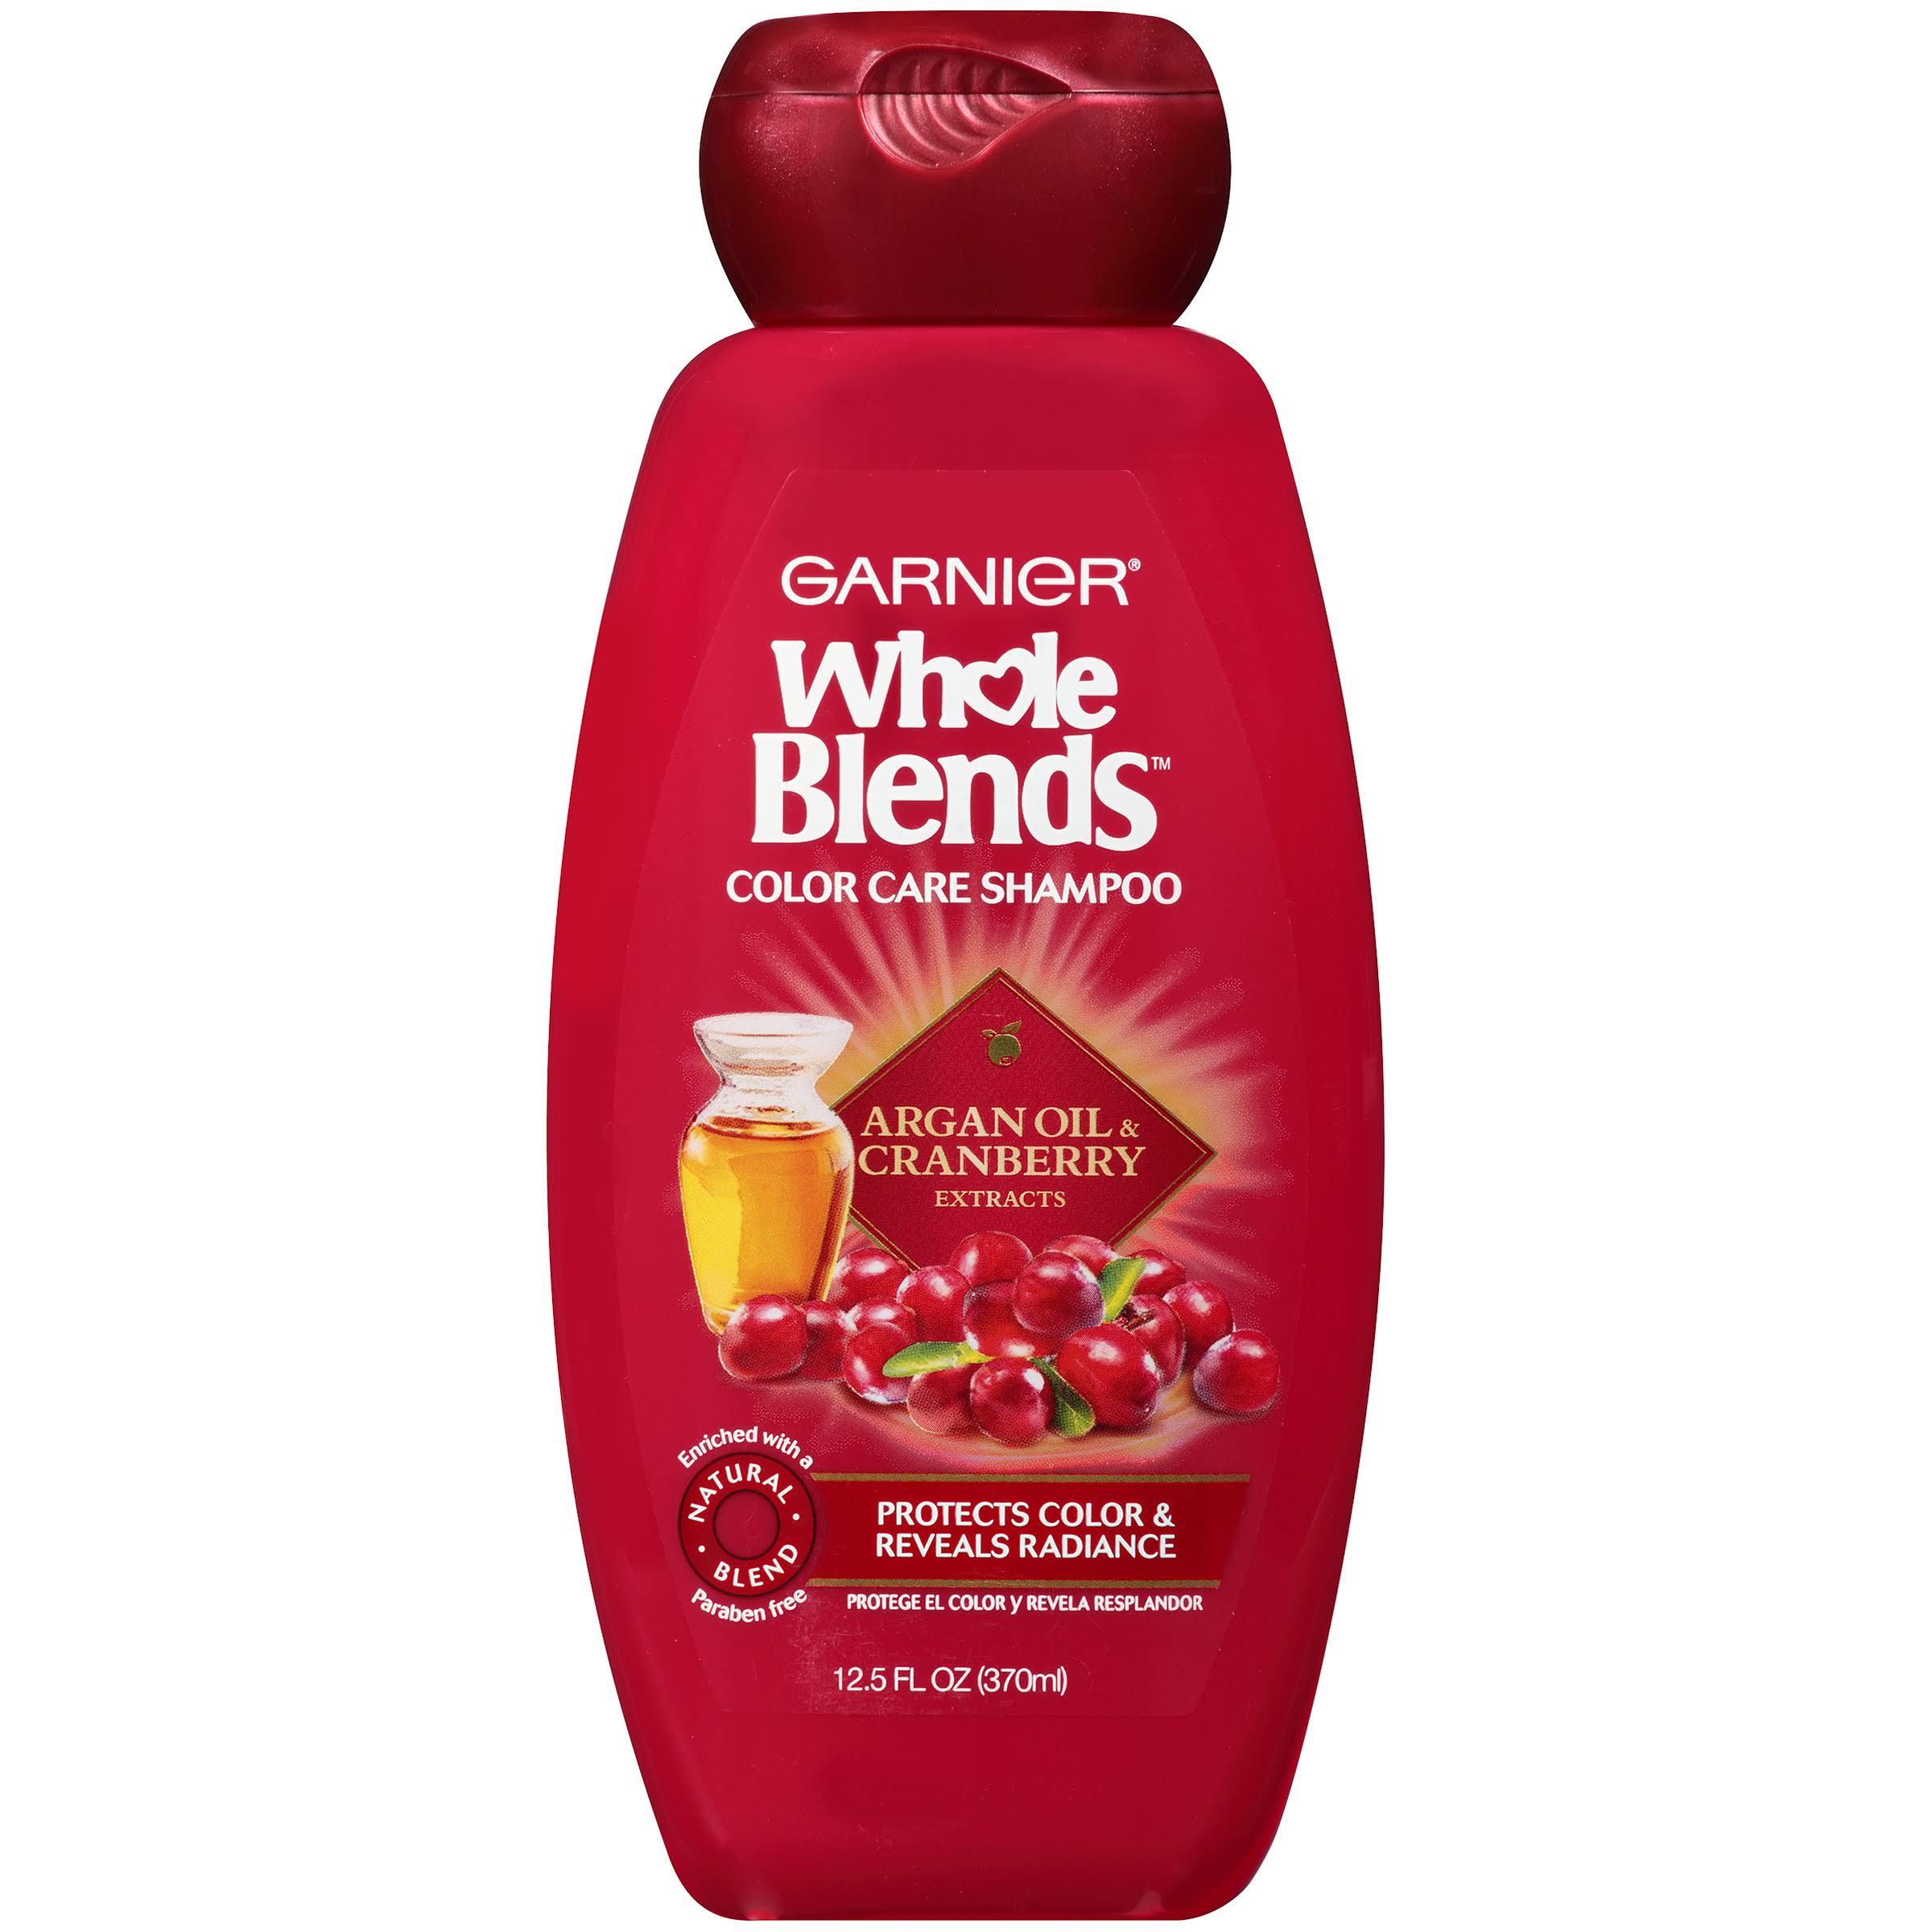 Garnier Whole Blends Color Care Shampoo - Argan Oil and Cranberry Extracts